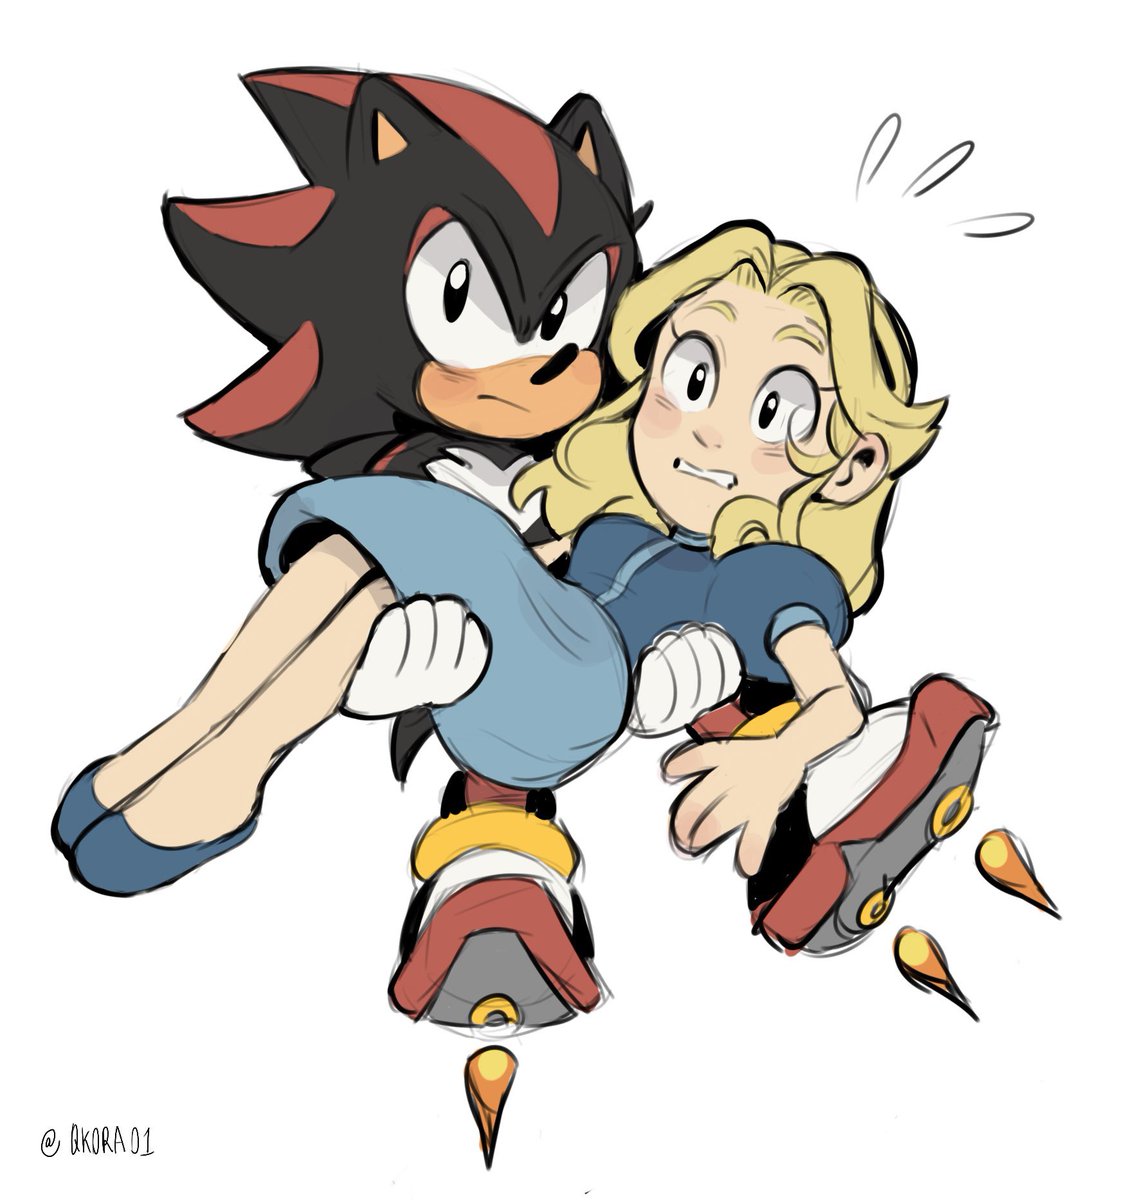 This is old art from my doodle account but I’m trying to bide time for the comic I got cooking up 👉👈

Please enjoy space siblings 

#ShadowTheHedgehog #Mariarobotnik #SonicTheHedeghog #sonicfanart